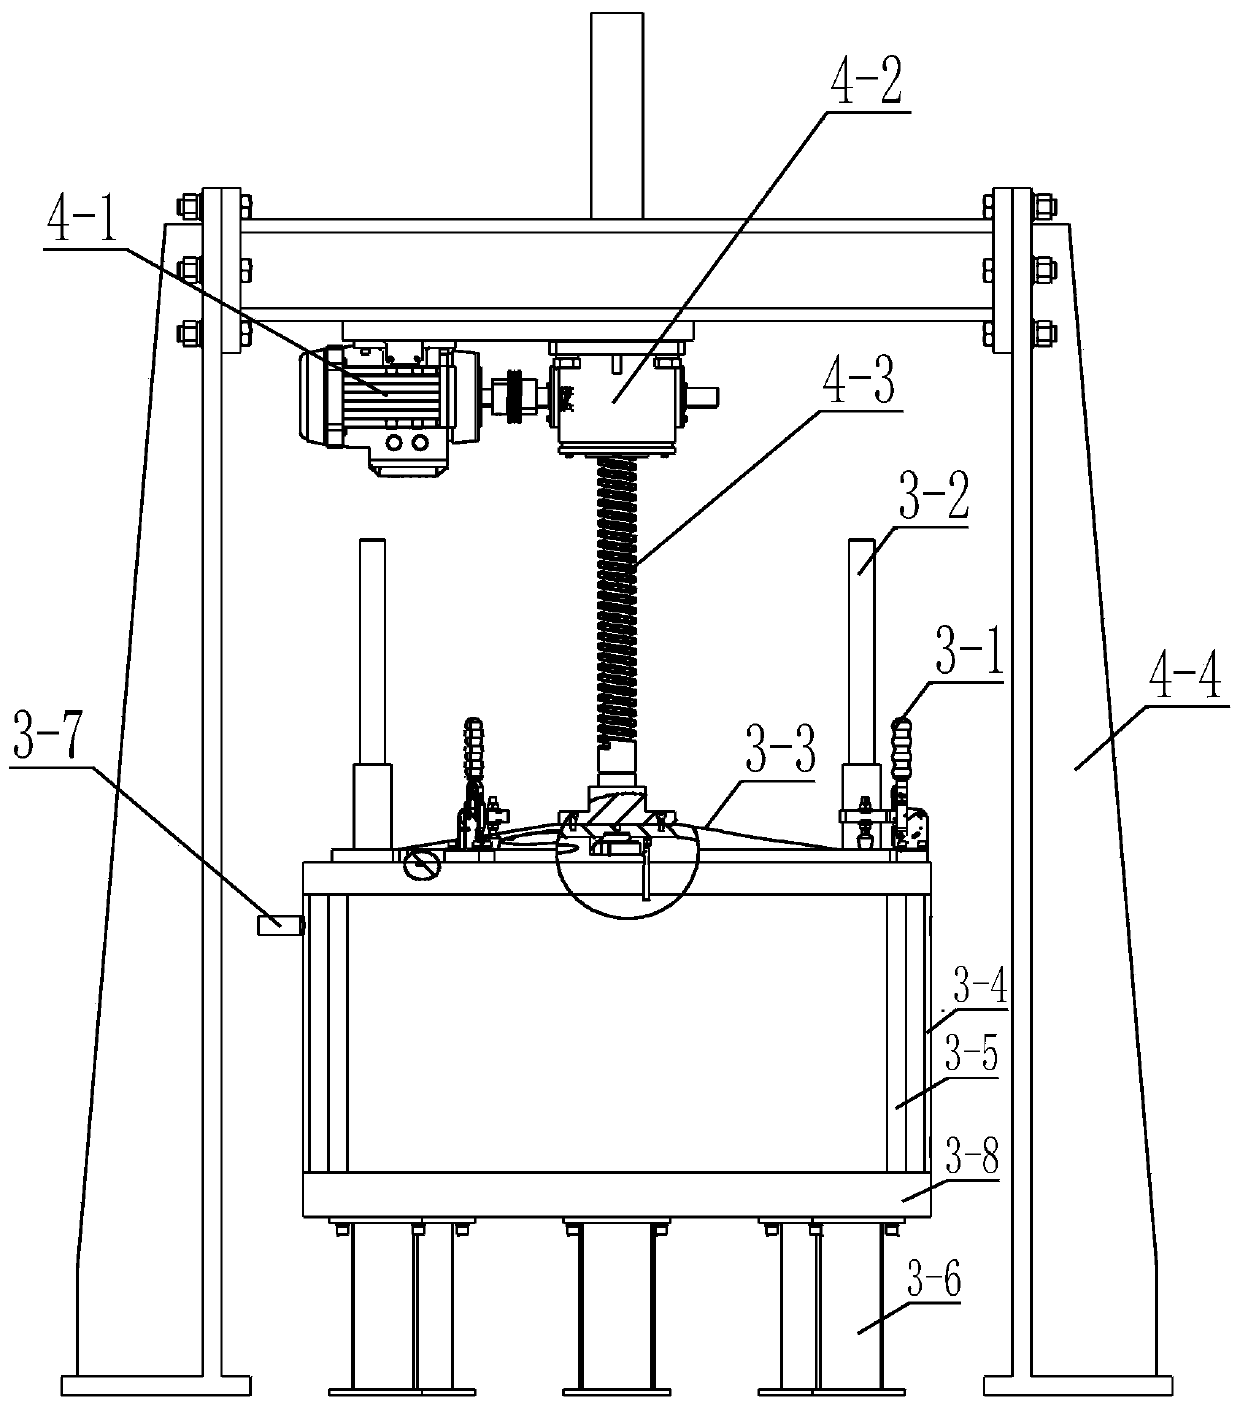 Centrifugal supergravity casting and directional solidification system